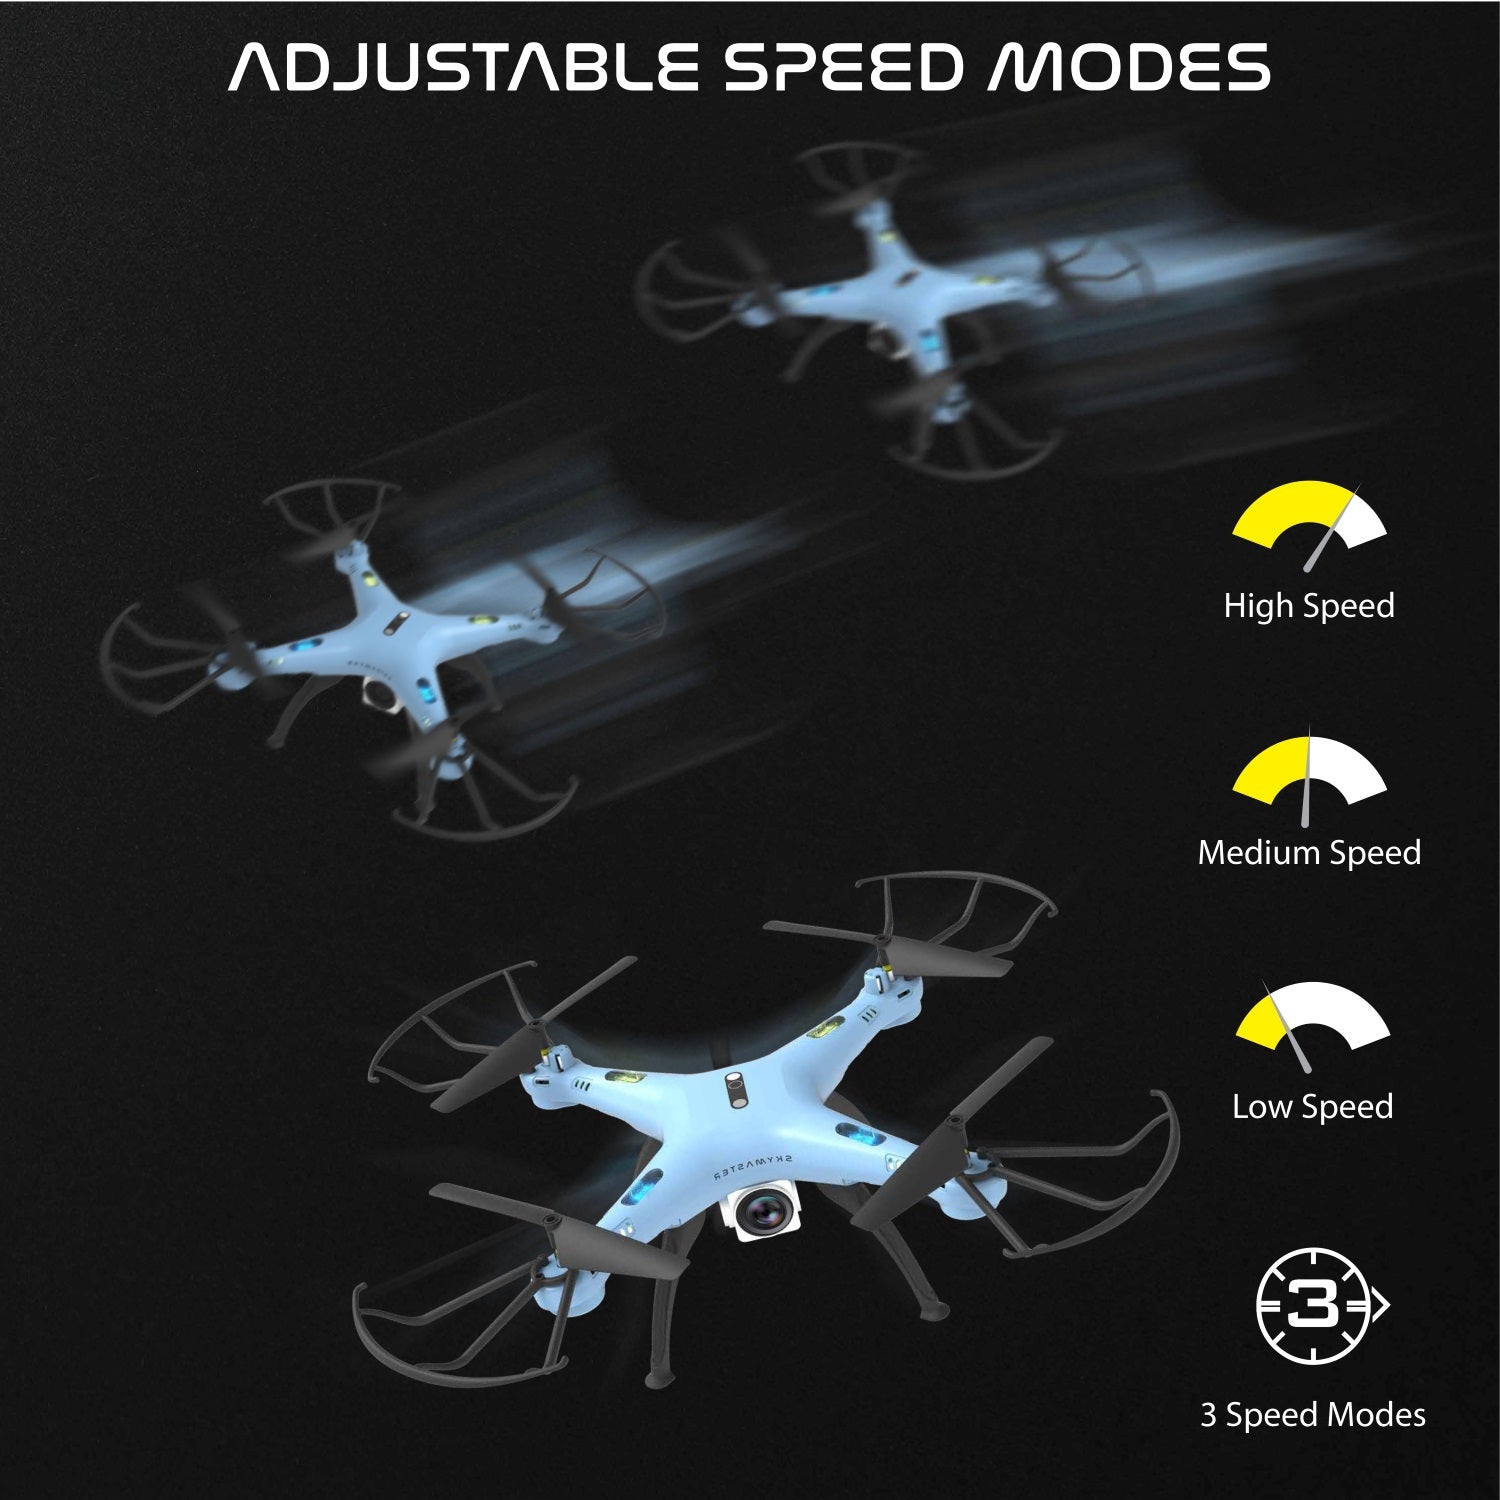 Skymaster drone by ELECTROBOTIC. 3 Speed Modes. Drones for beginners